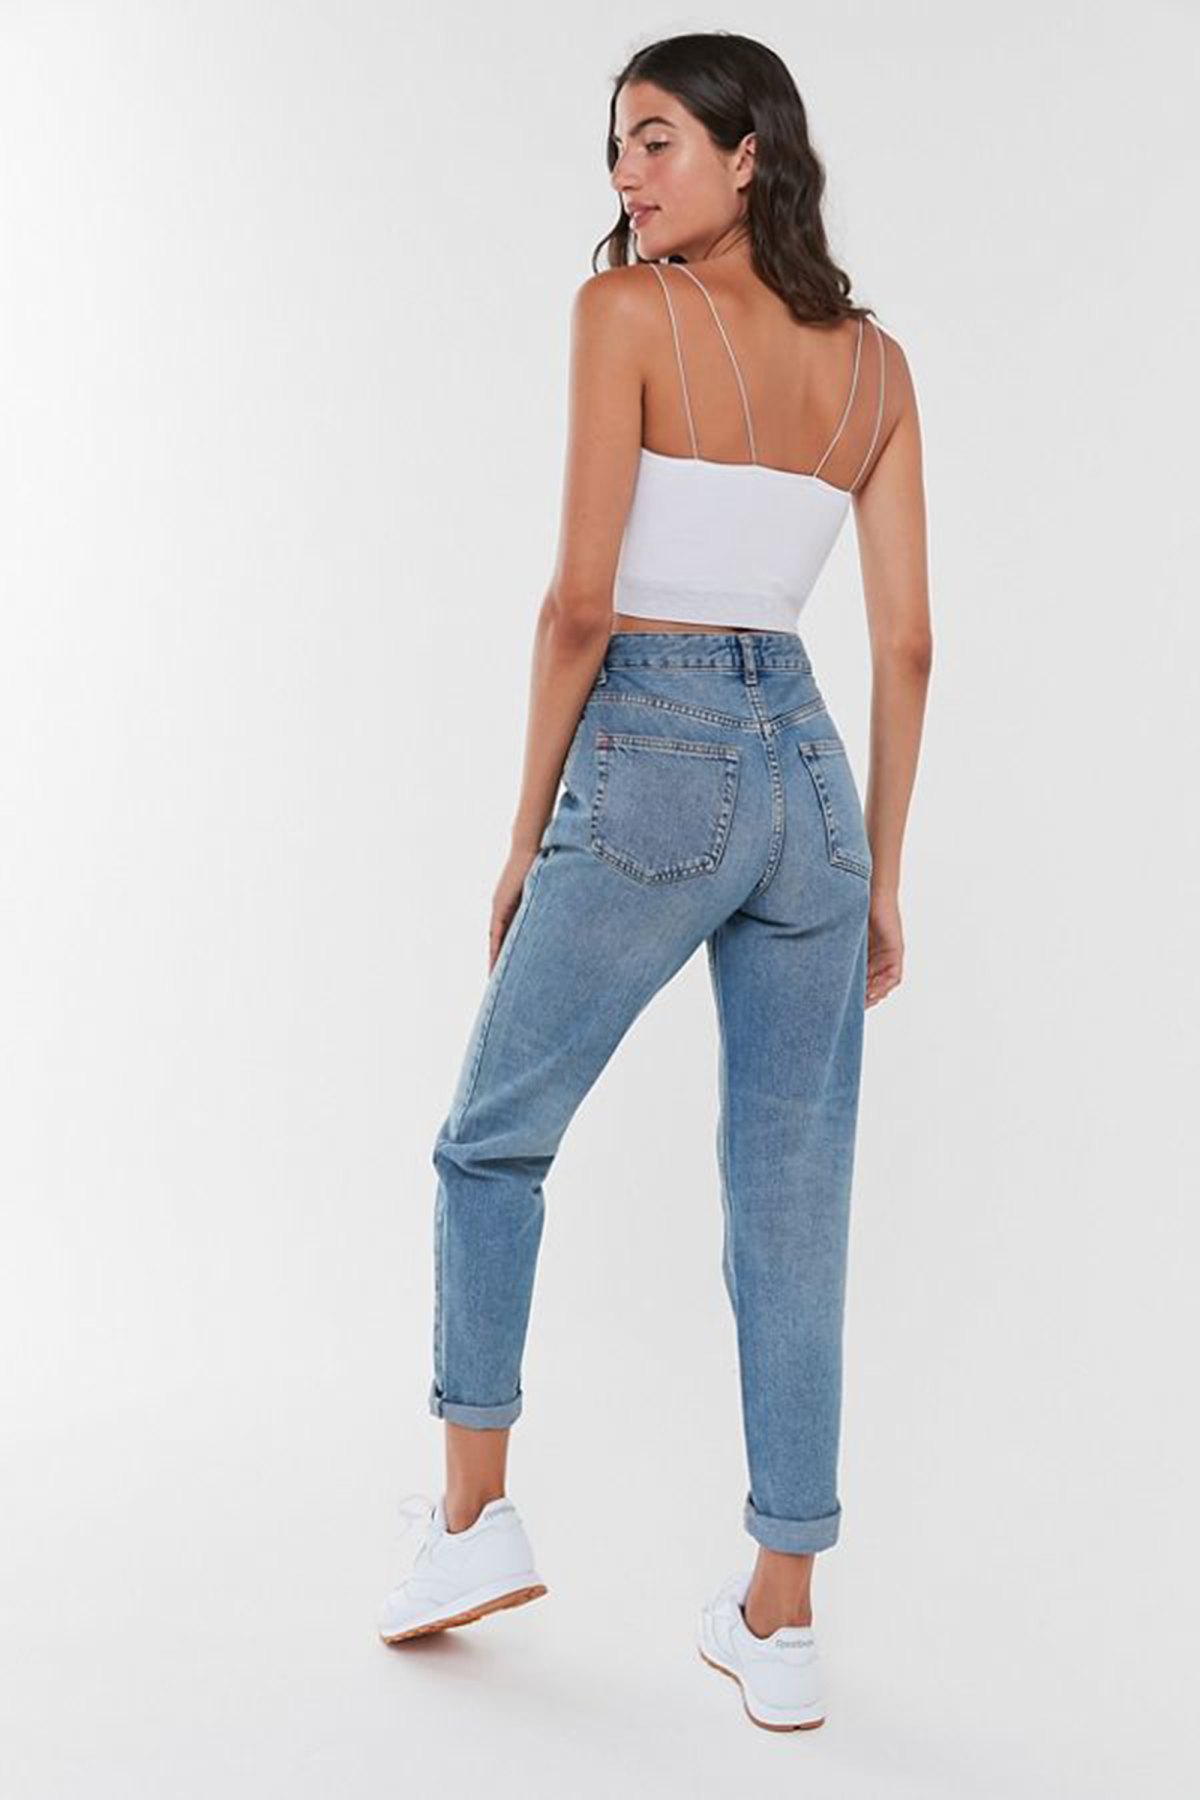 Fearless Fjerde Mindful 5 of Our Favorite BDG Jeans on Sale for 30% Off at Urban Outfitters